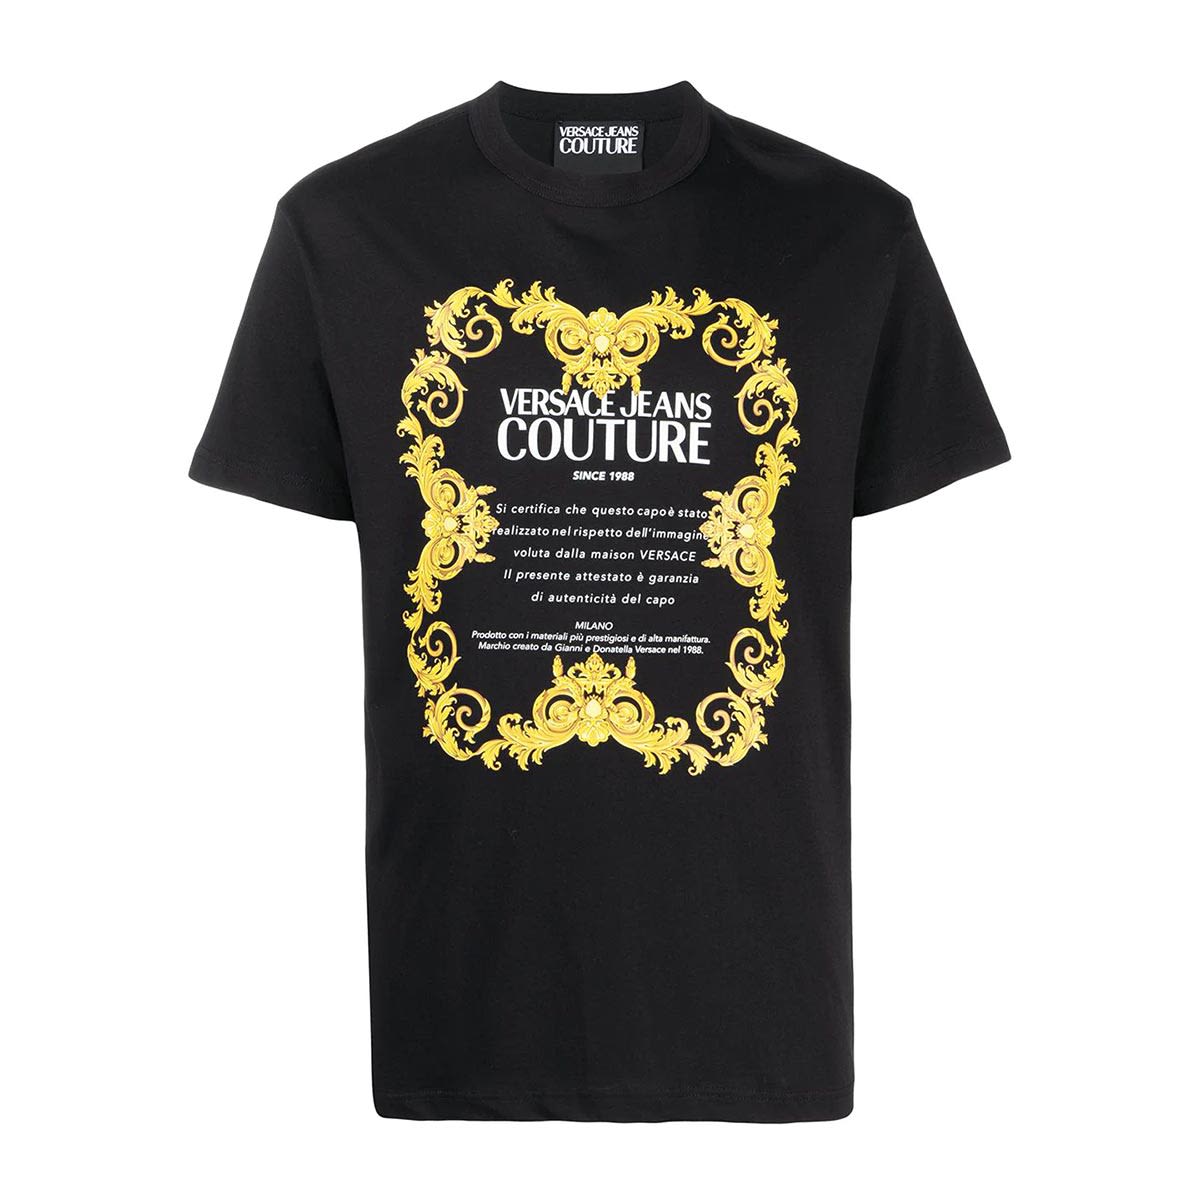 VERSACE JEANS COUTURE VERSACE T-SHIRT NERA UOMO,11772675